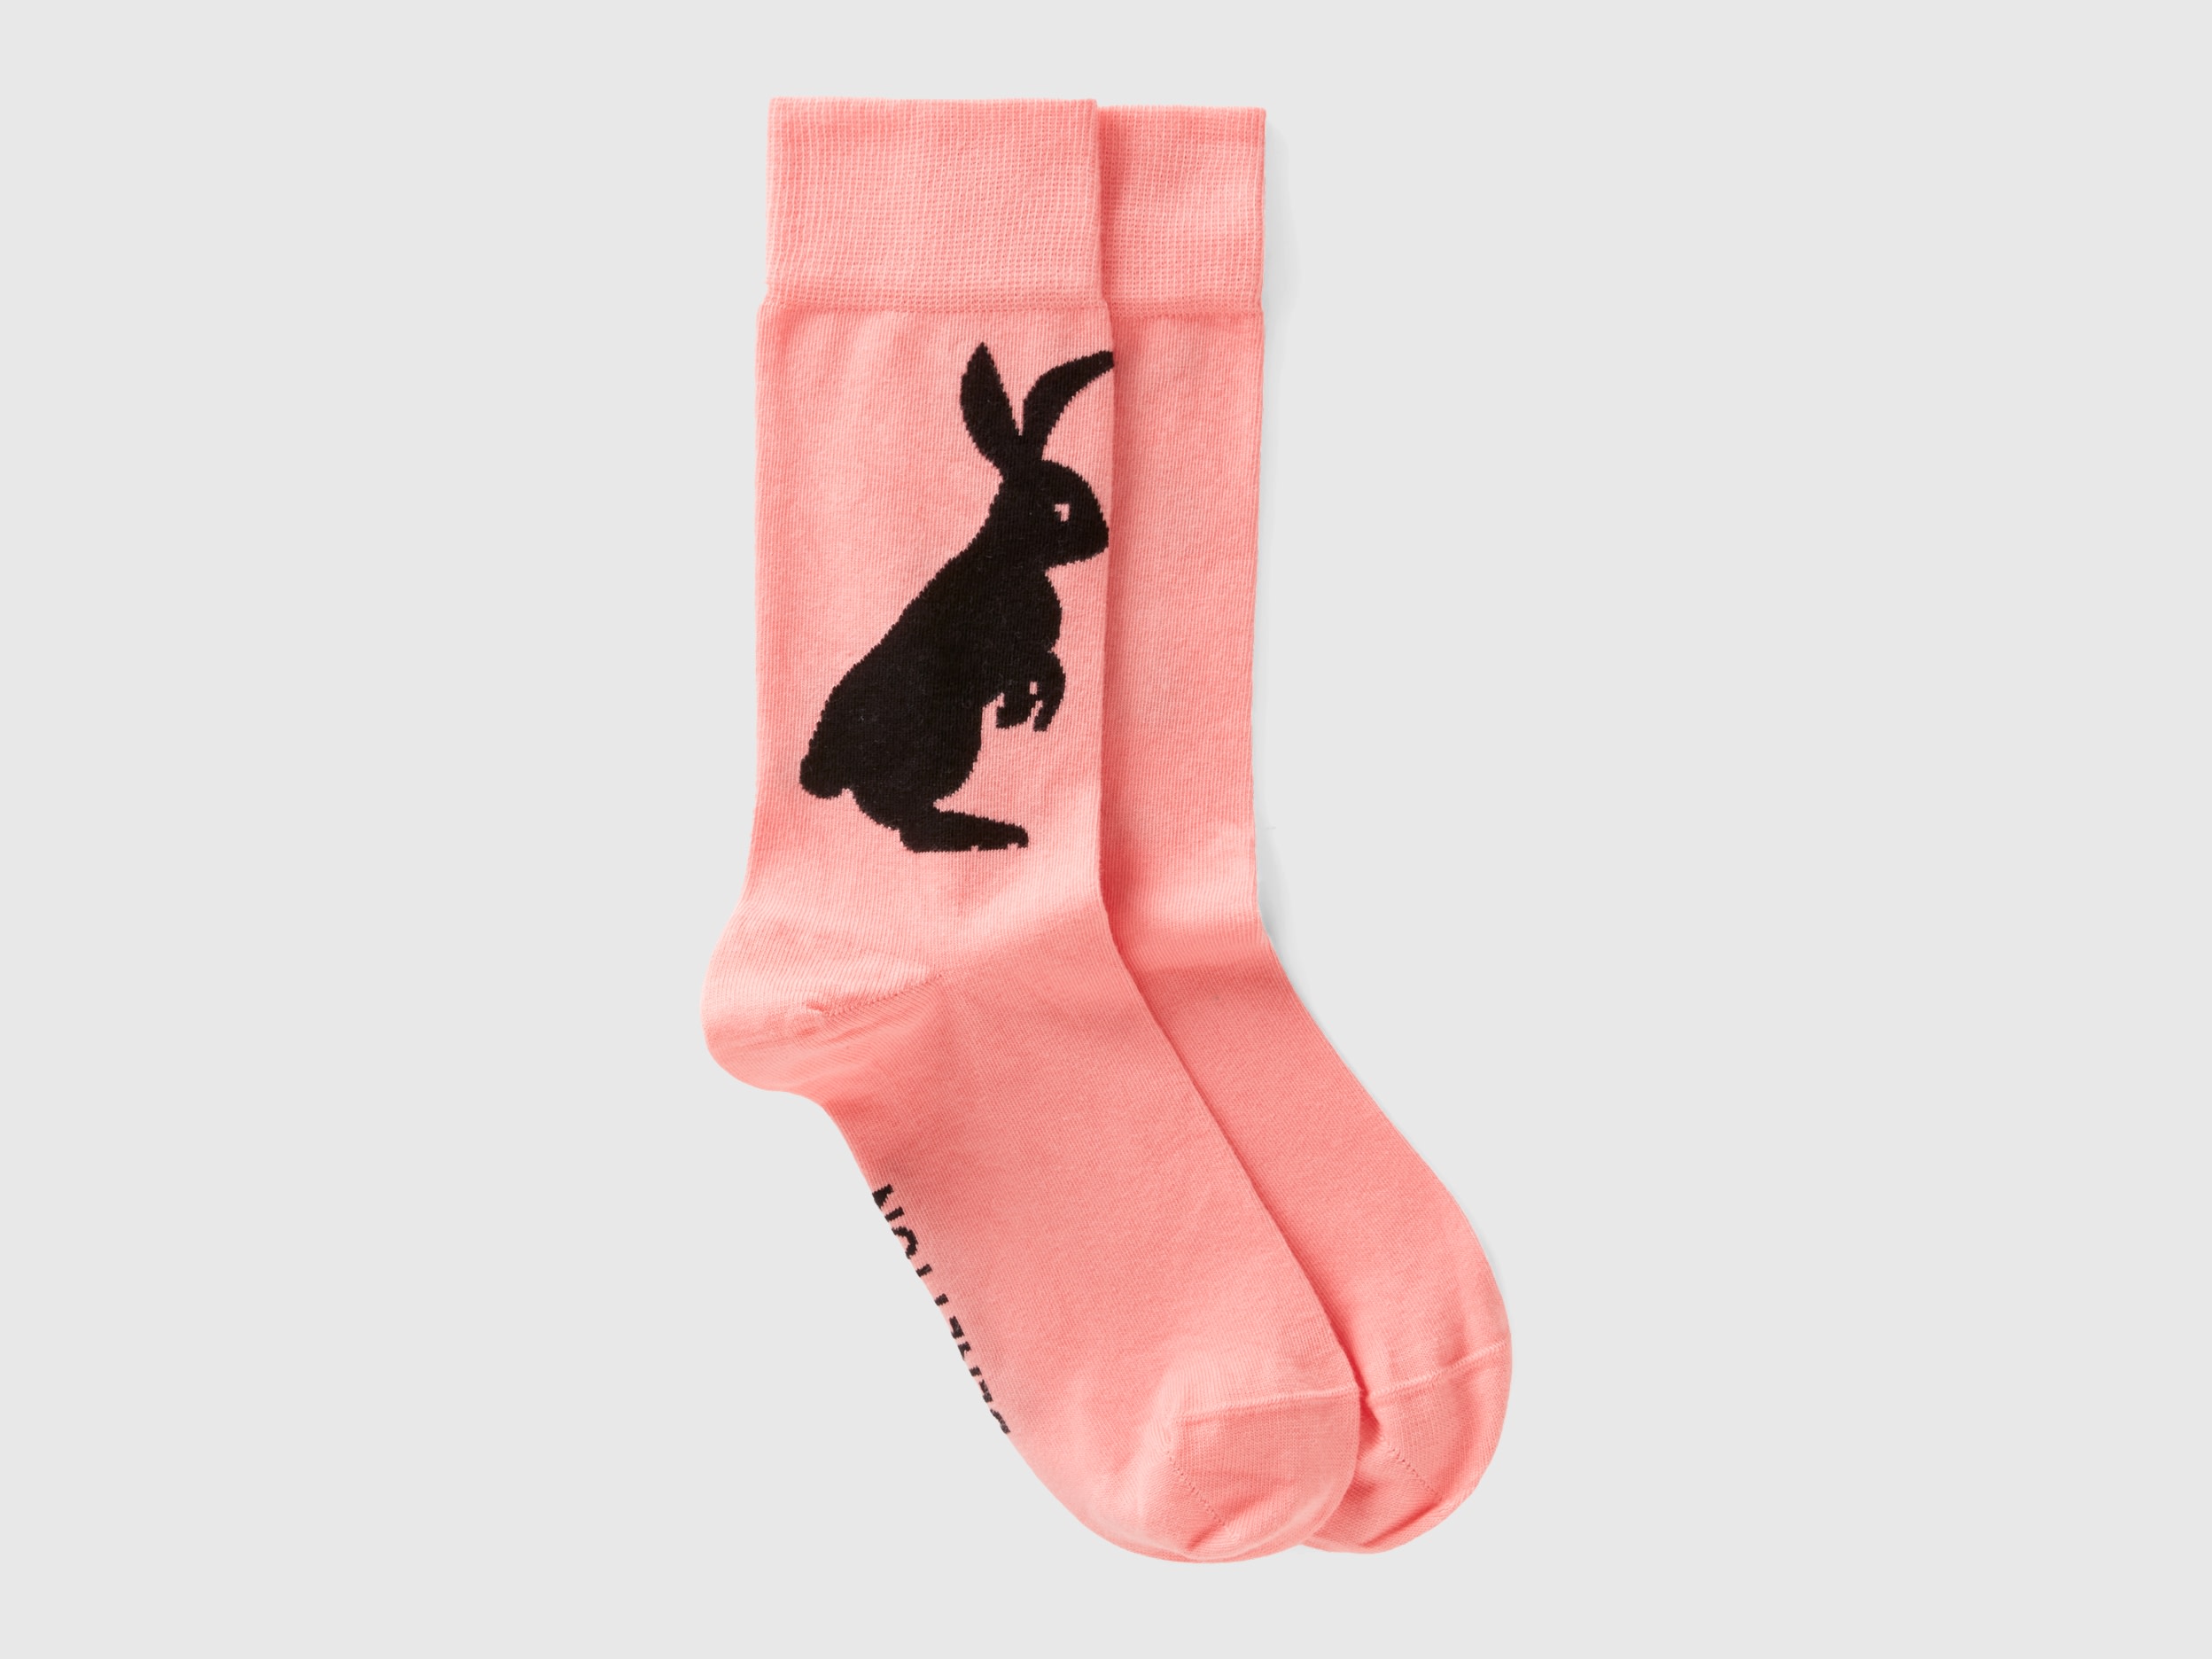 Benetton, Pink Socks With Bunny Design, size 8-11, Pink, Women